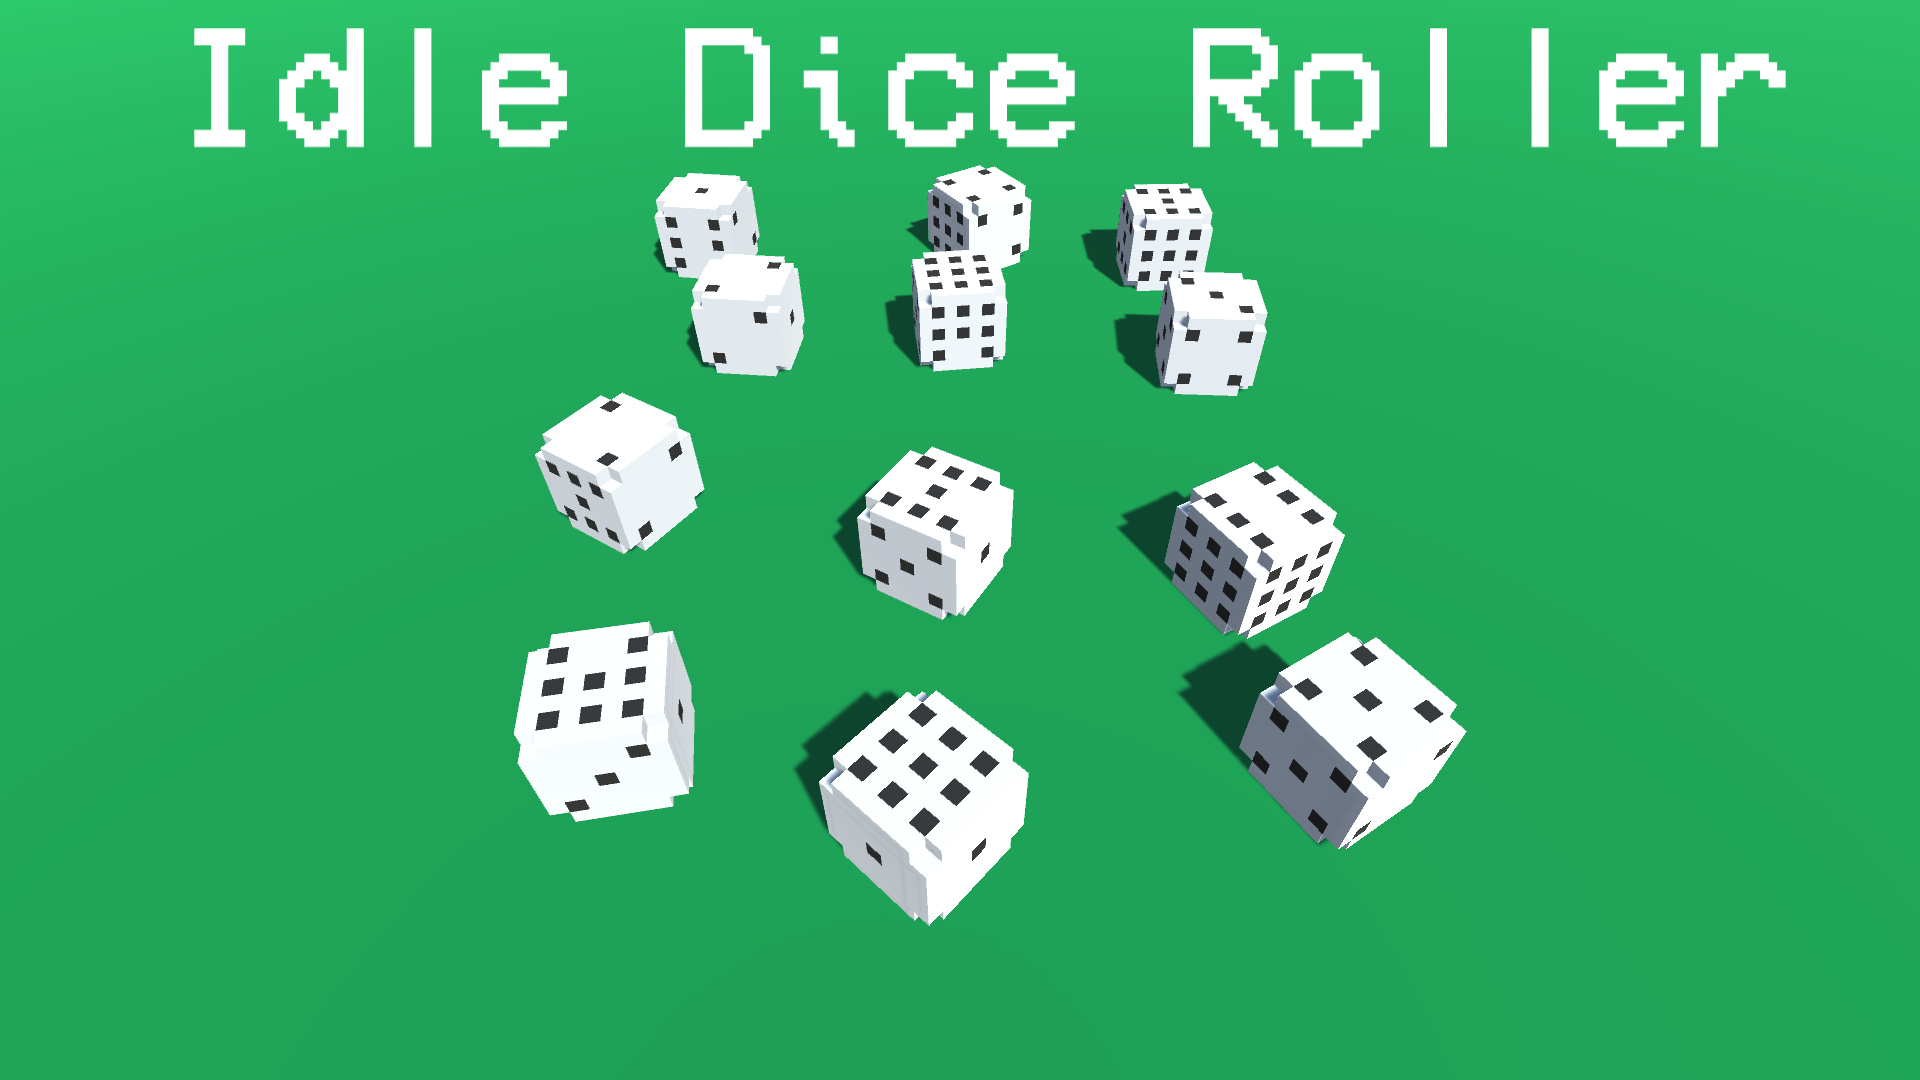 Roll the dice. Dice Roller. Roll the dice v0.2.0. Chosen by fare dice Roll.